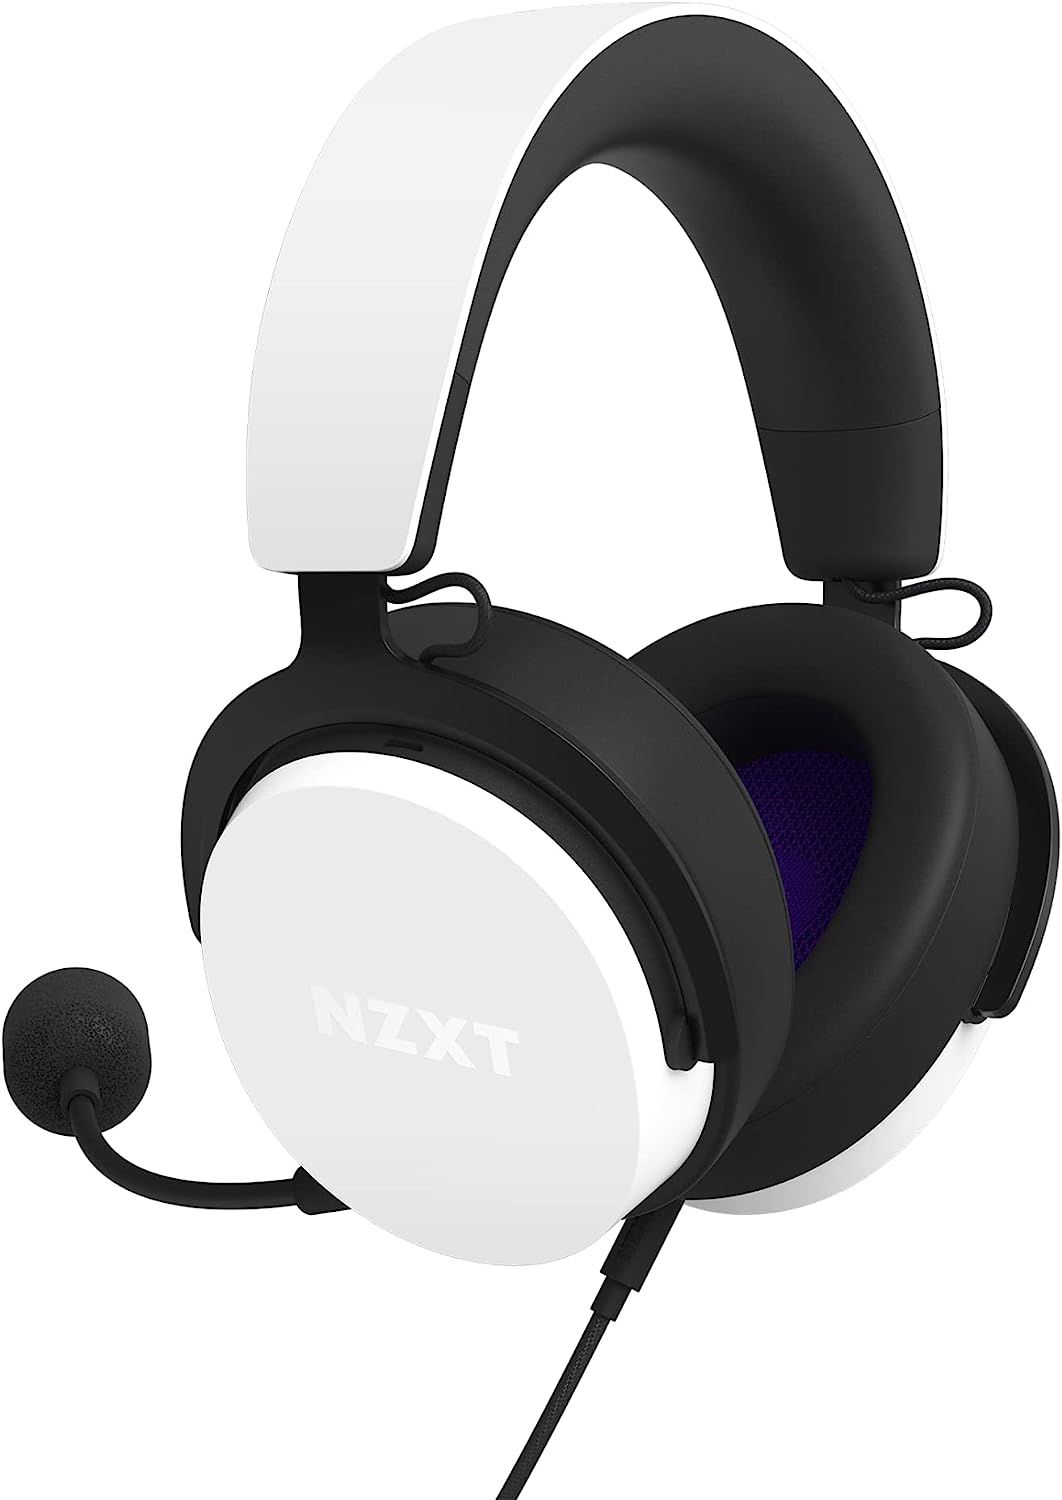 NZXT Relay Hi-Res Certified Gaming Headset-white